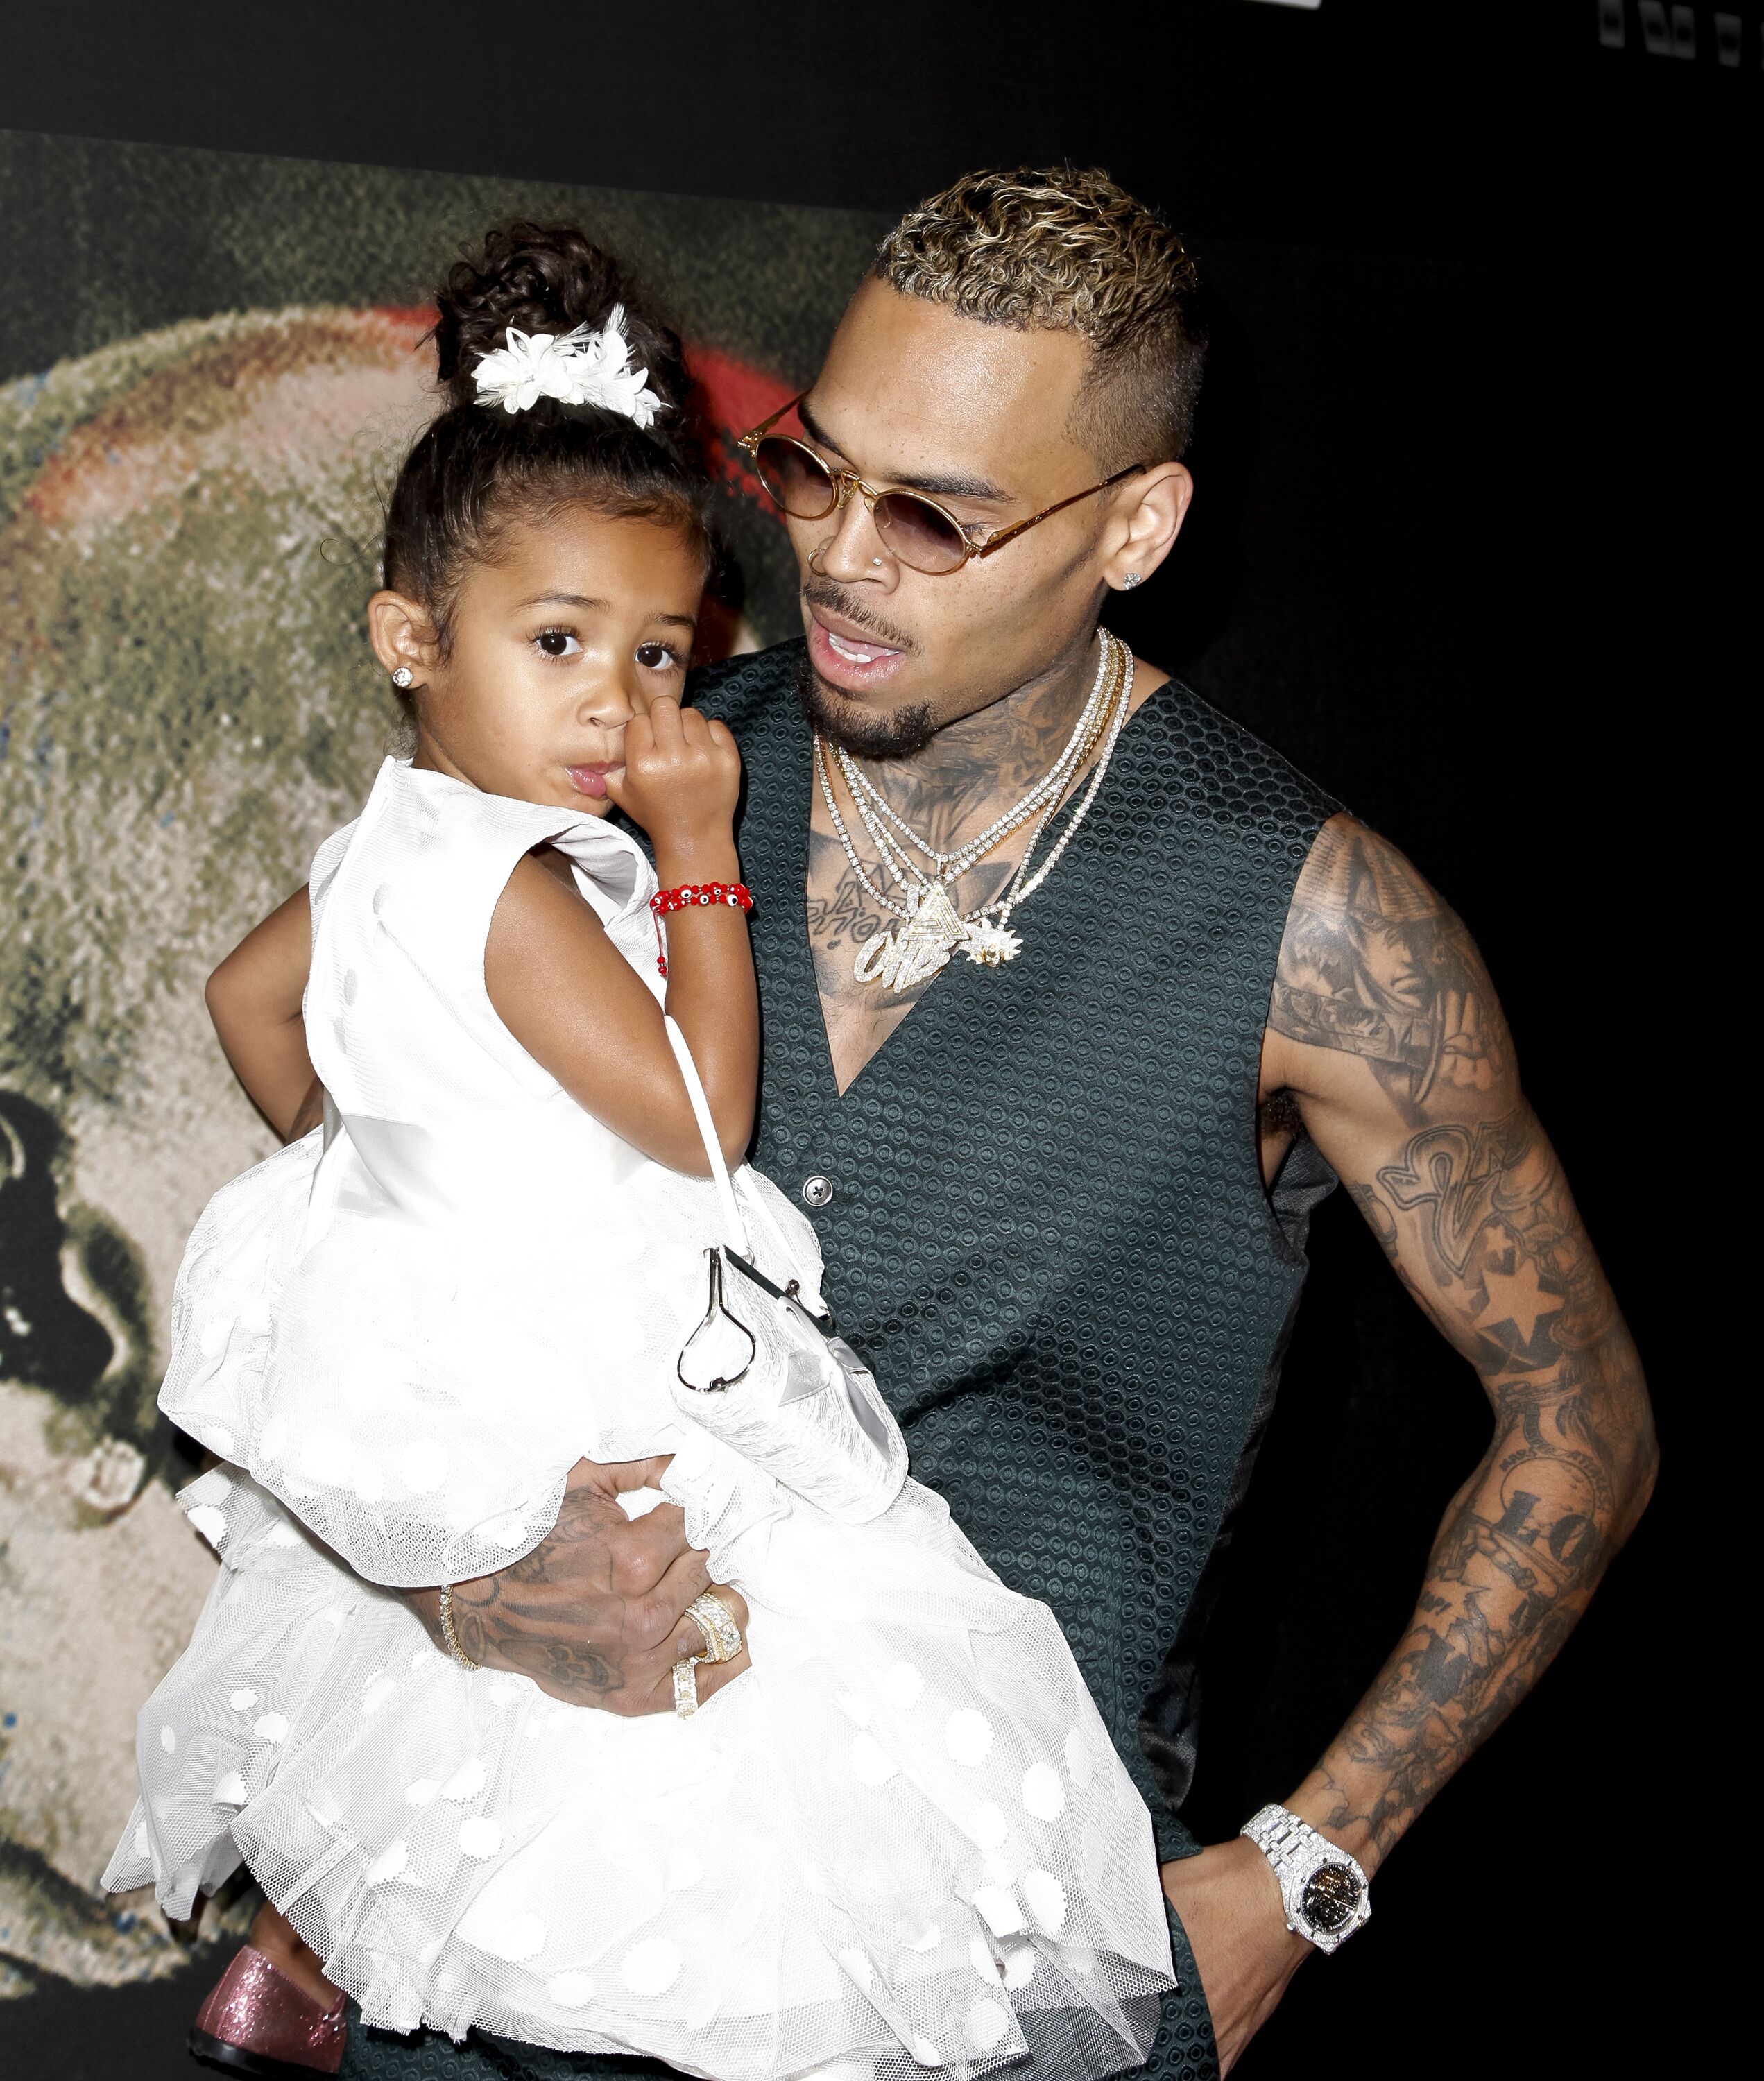 Chris Brown and his daughter Royalty attend an event together | Source: Getty Images/GlobalImagesUkraine